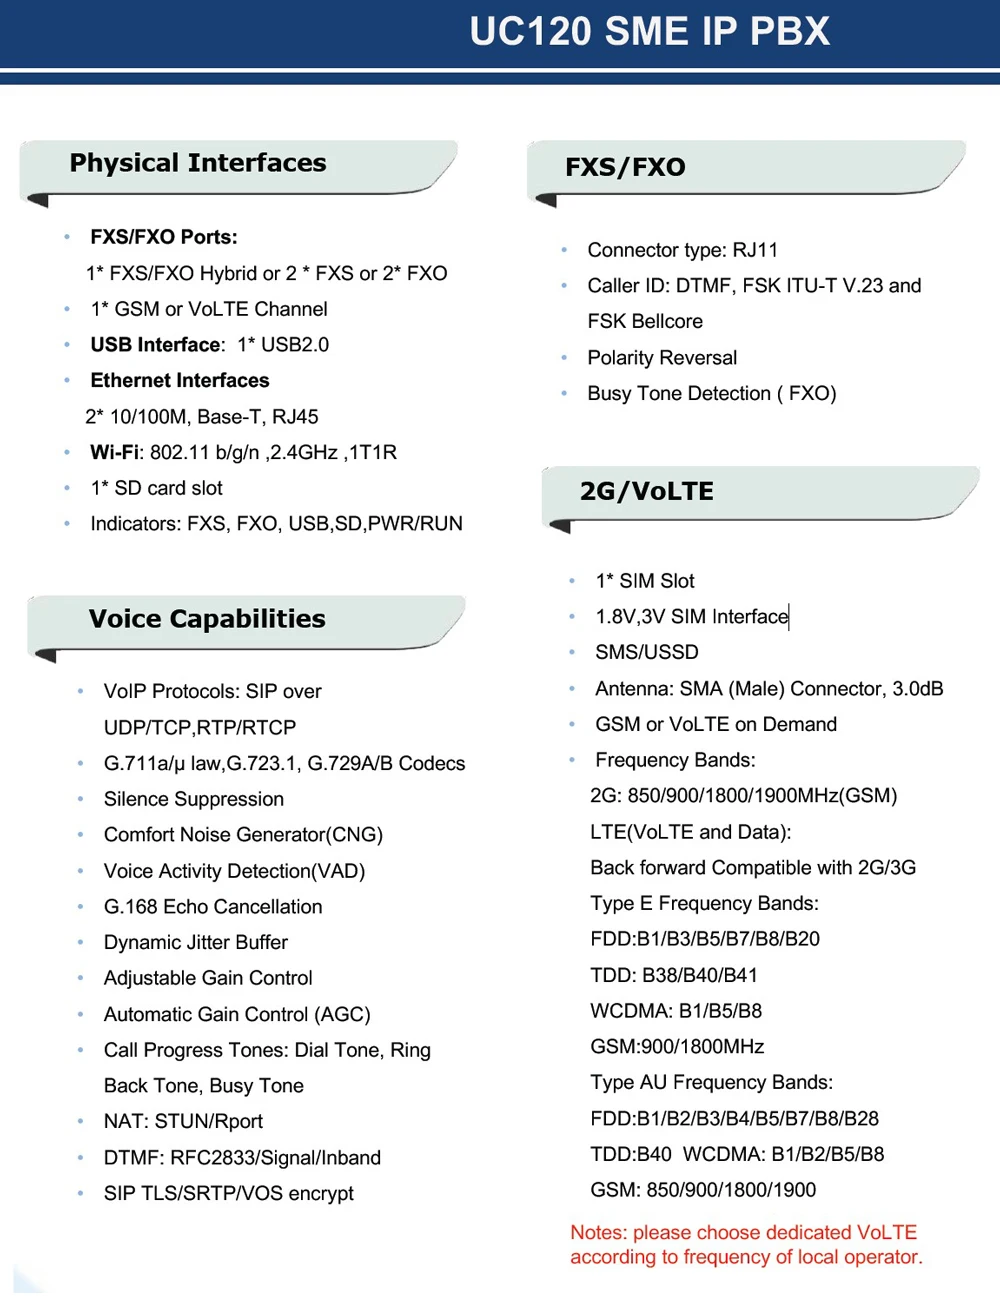 UC120 is a VoIP PBX phone system Dinstar IP PBX Support 60 SIP users and 15 concurrent calls ,1 LTE / GSM 1 FXS 1 FXO